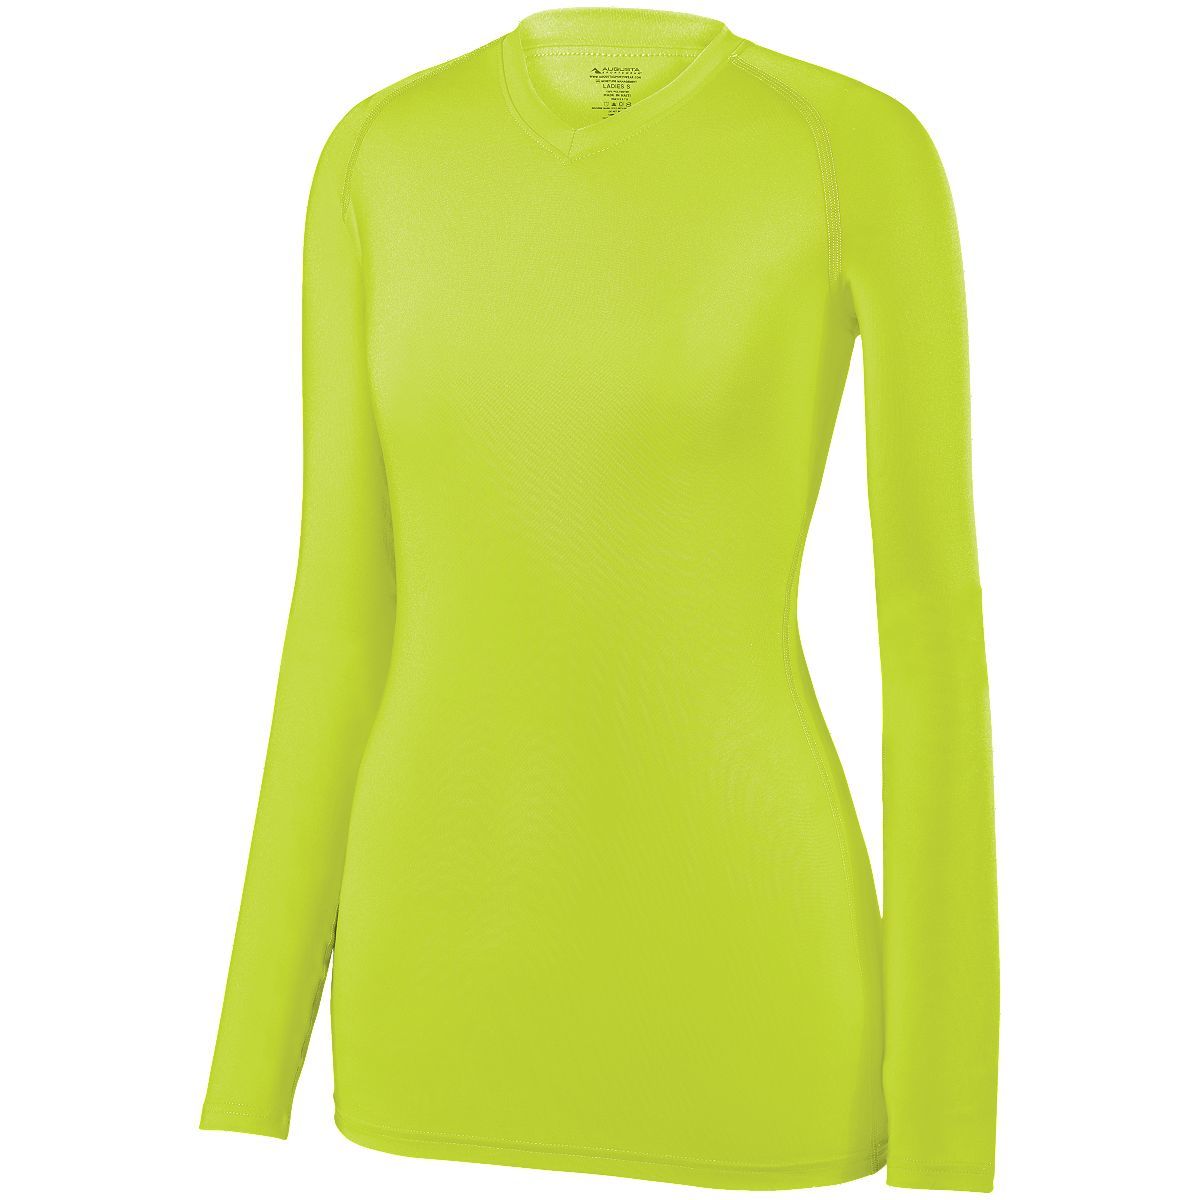 High 5 Ladies Maven Jersey in Lime  -Part of the Ladies, Ladies-Jersey, High5-Products, Volleyball, Shirts product lines at KanaleyCreations.com